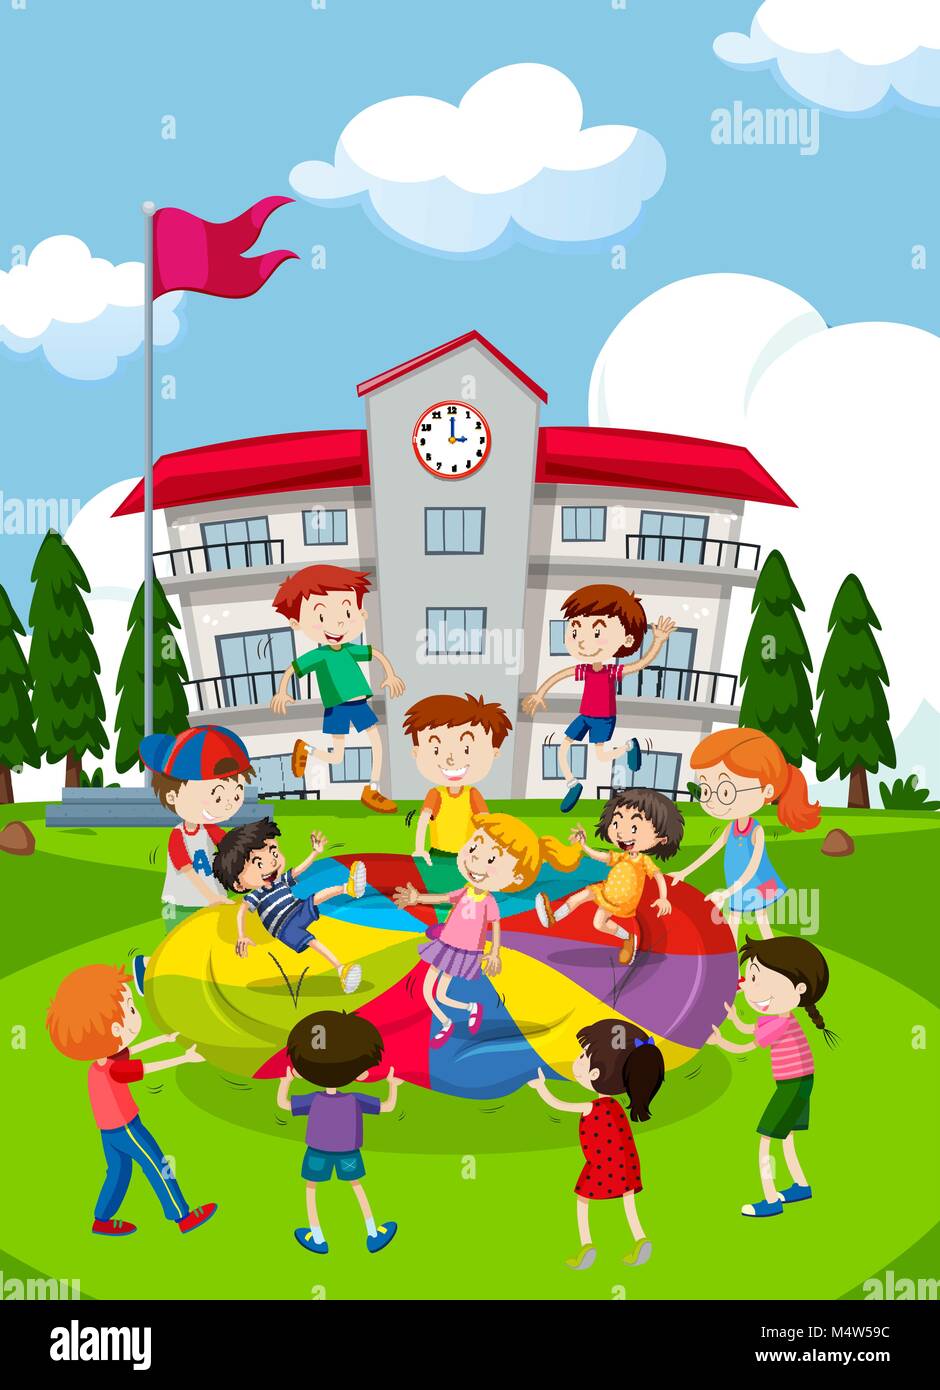 Children Playing At School Illustration Stock Vector Image And Art Alamy